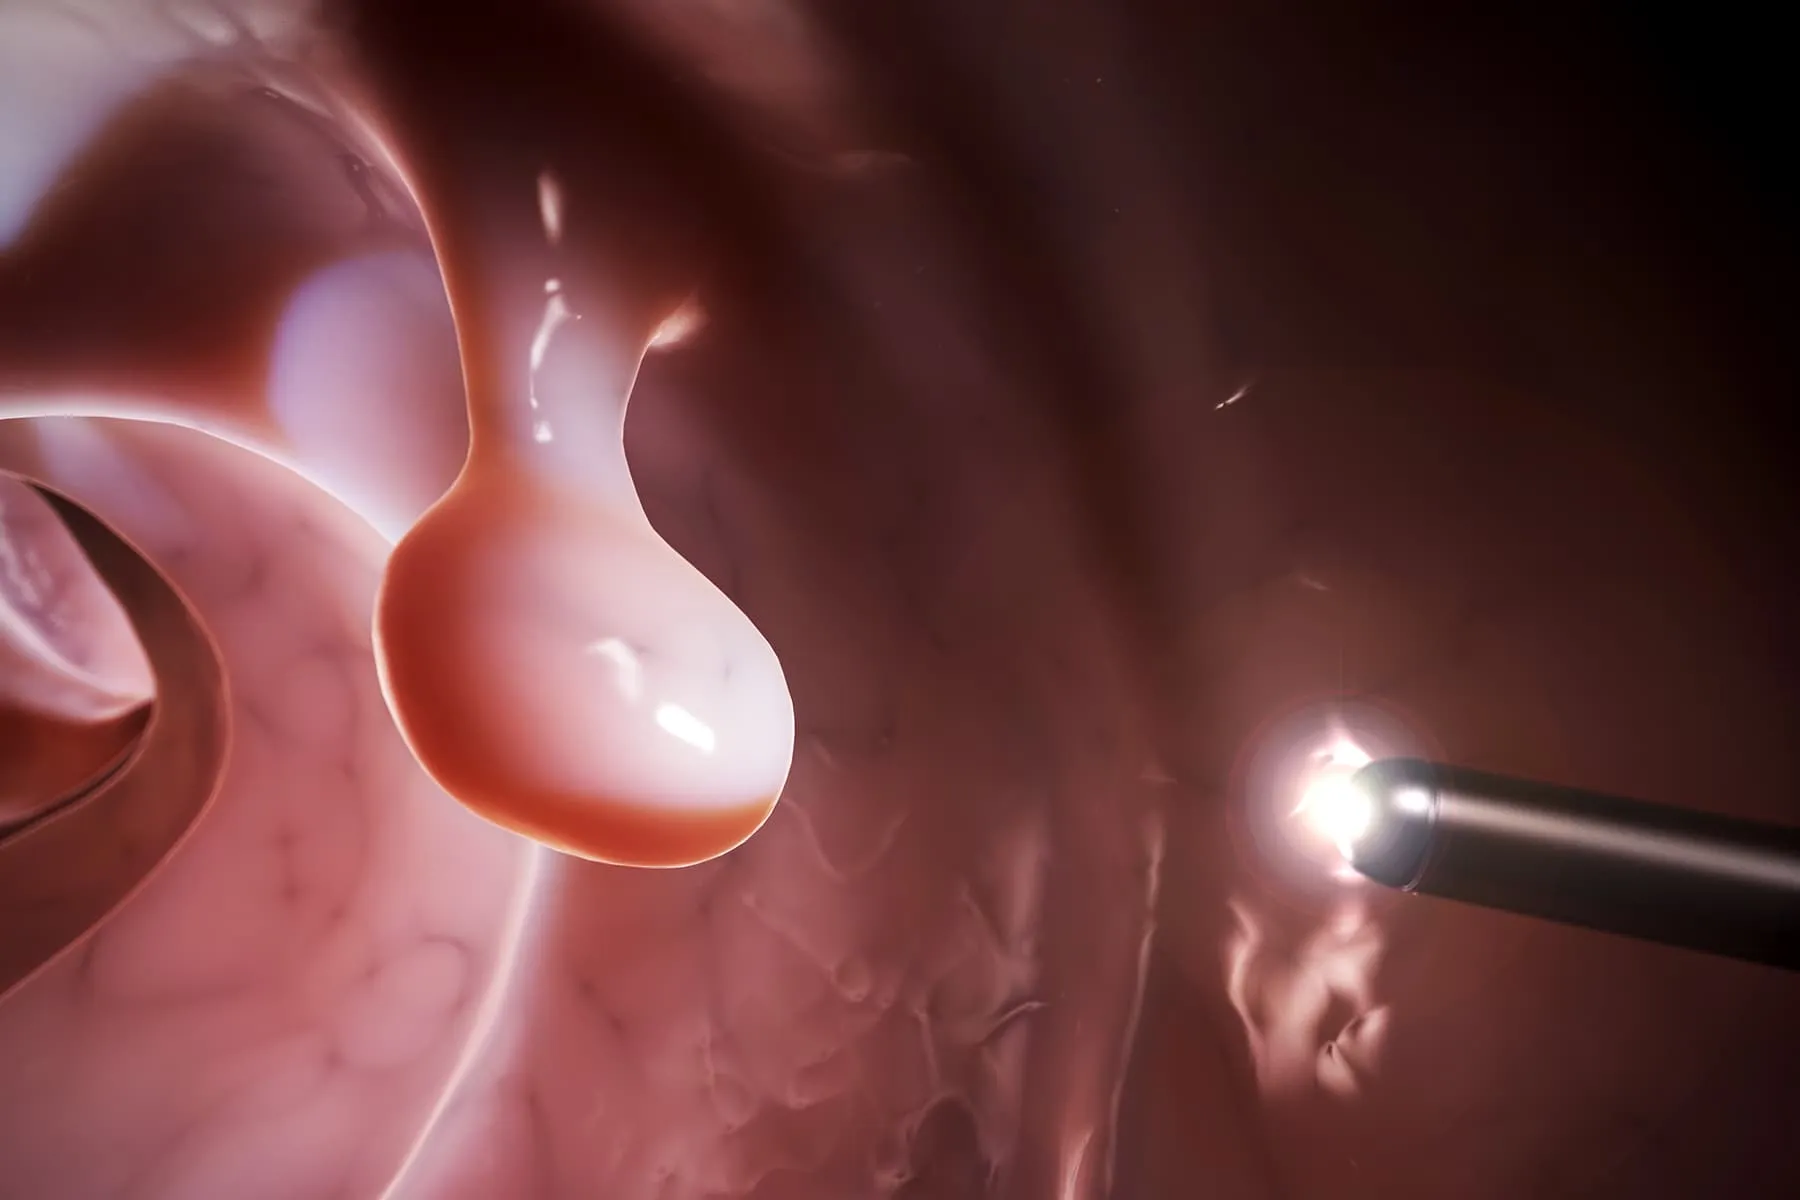 Your Next Colonoscopy Could Get an Assist From AI